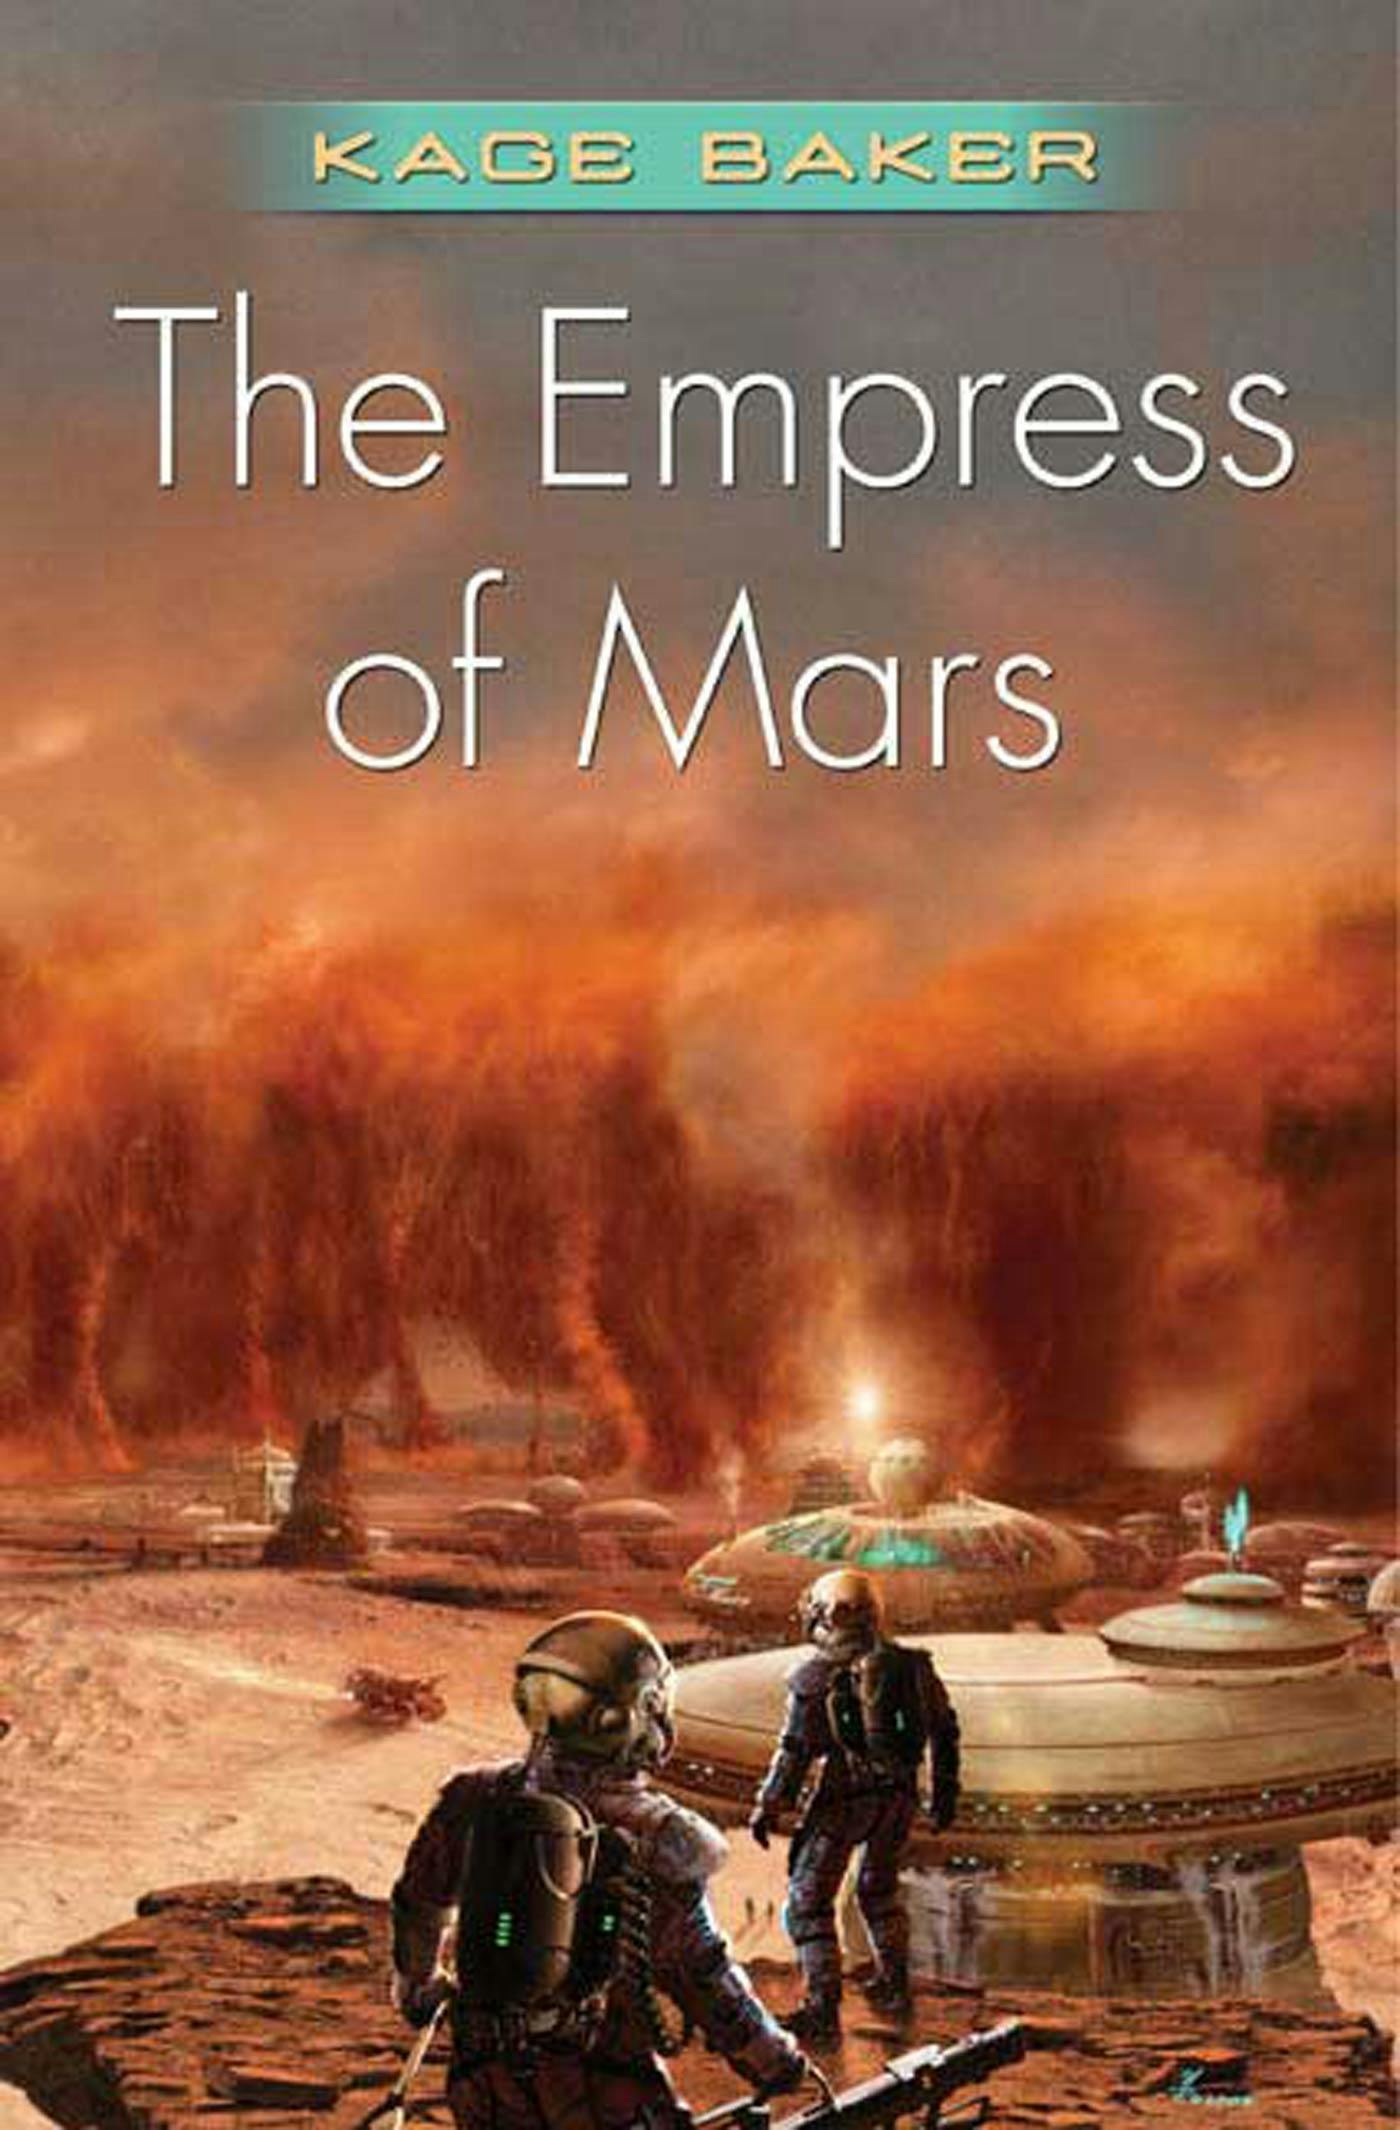 Cover for the book titled as: The Empress of Mars